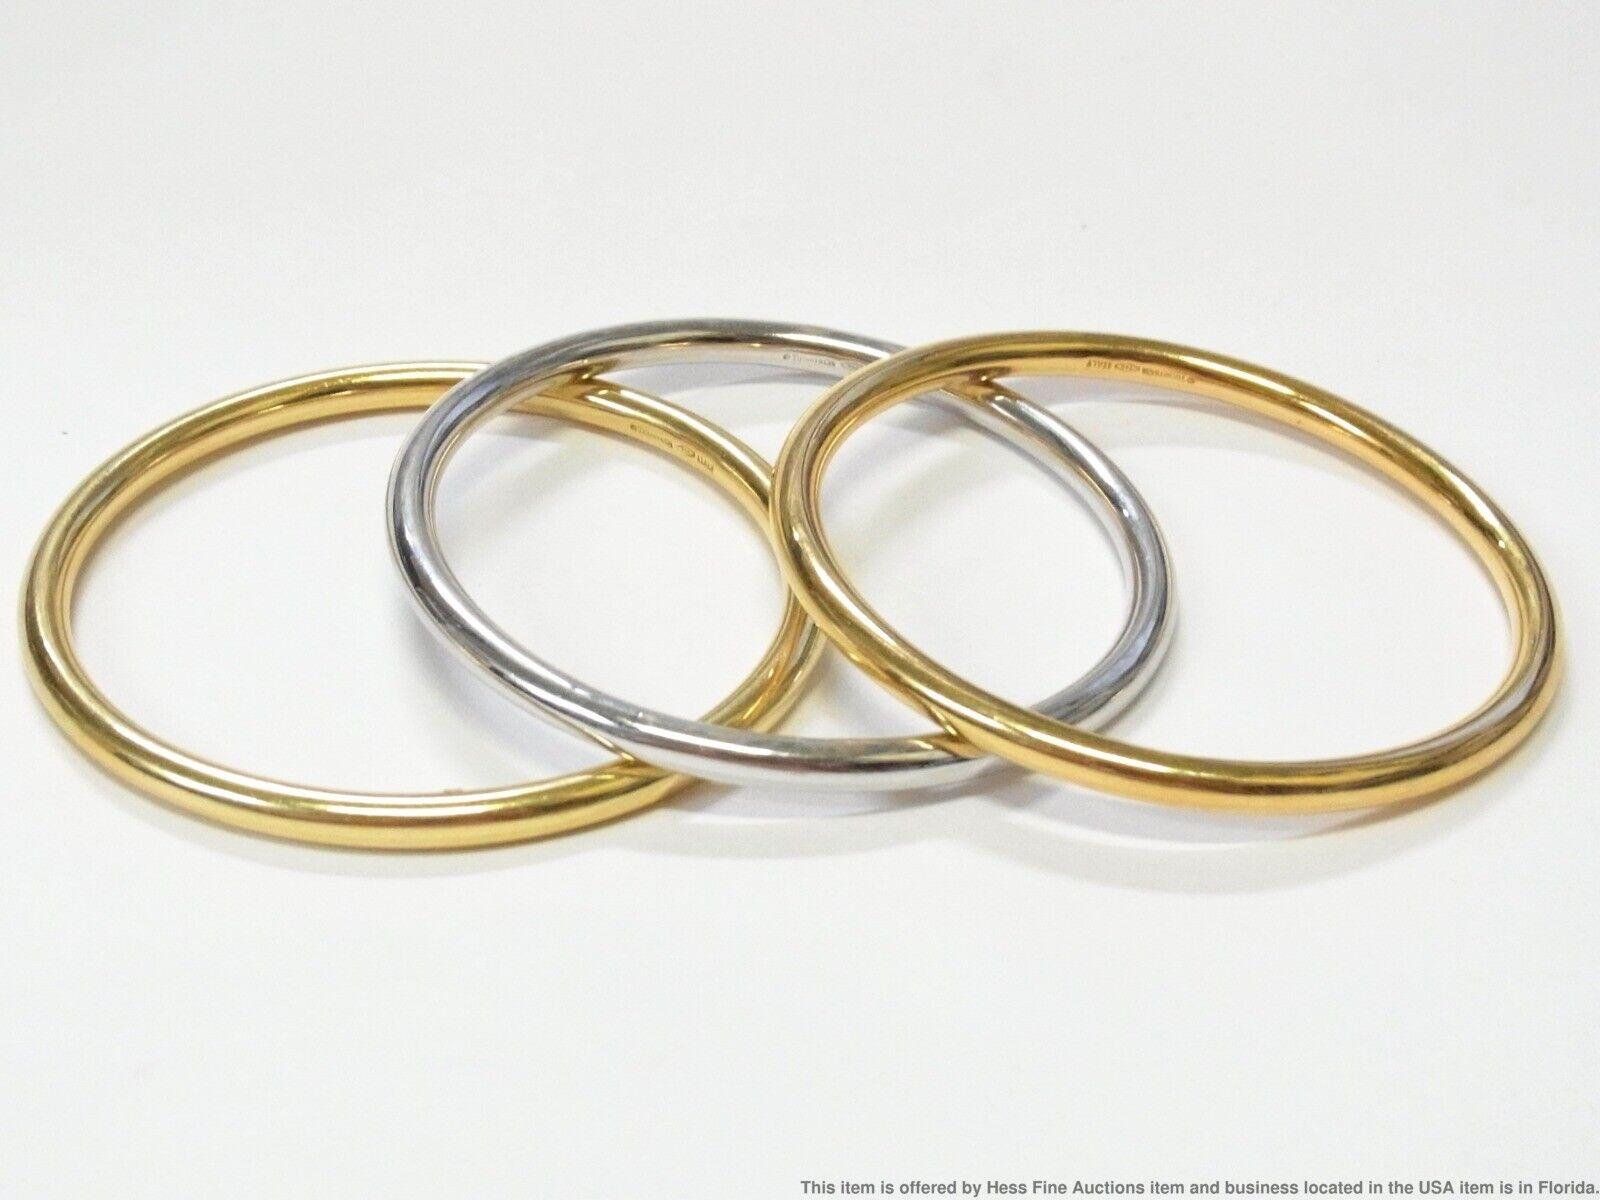 Tiffany & Co. Italy 18k Yellow & White Gold Trio of Bangle Bracelets Vintage

Here is your chance to purchase a beautiful and highly collectible designer set of bangle bracelets.  Truly a great piece at a great price! 

Description: A trio of